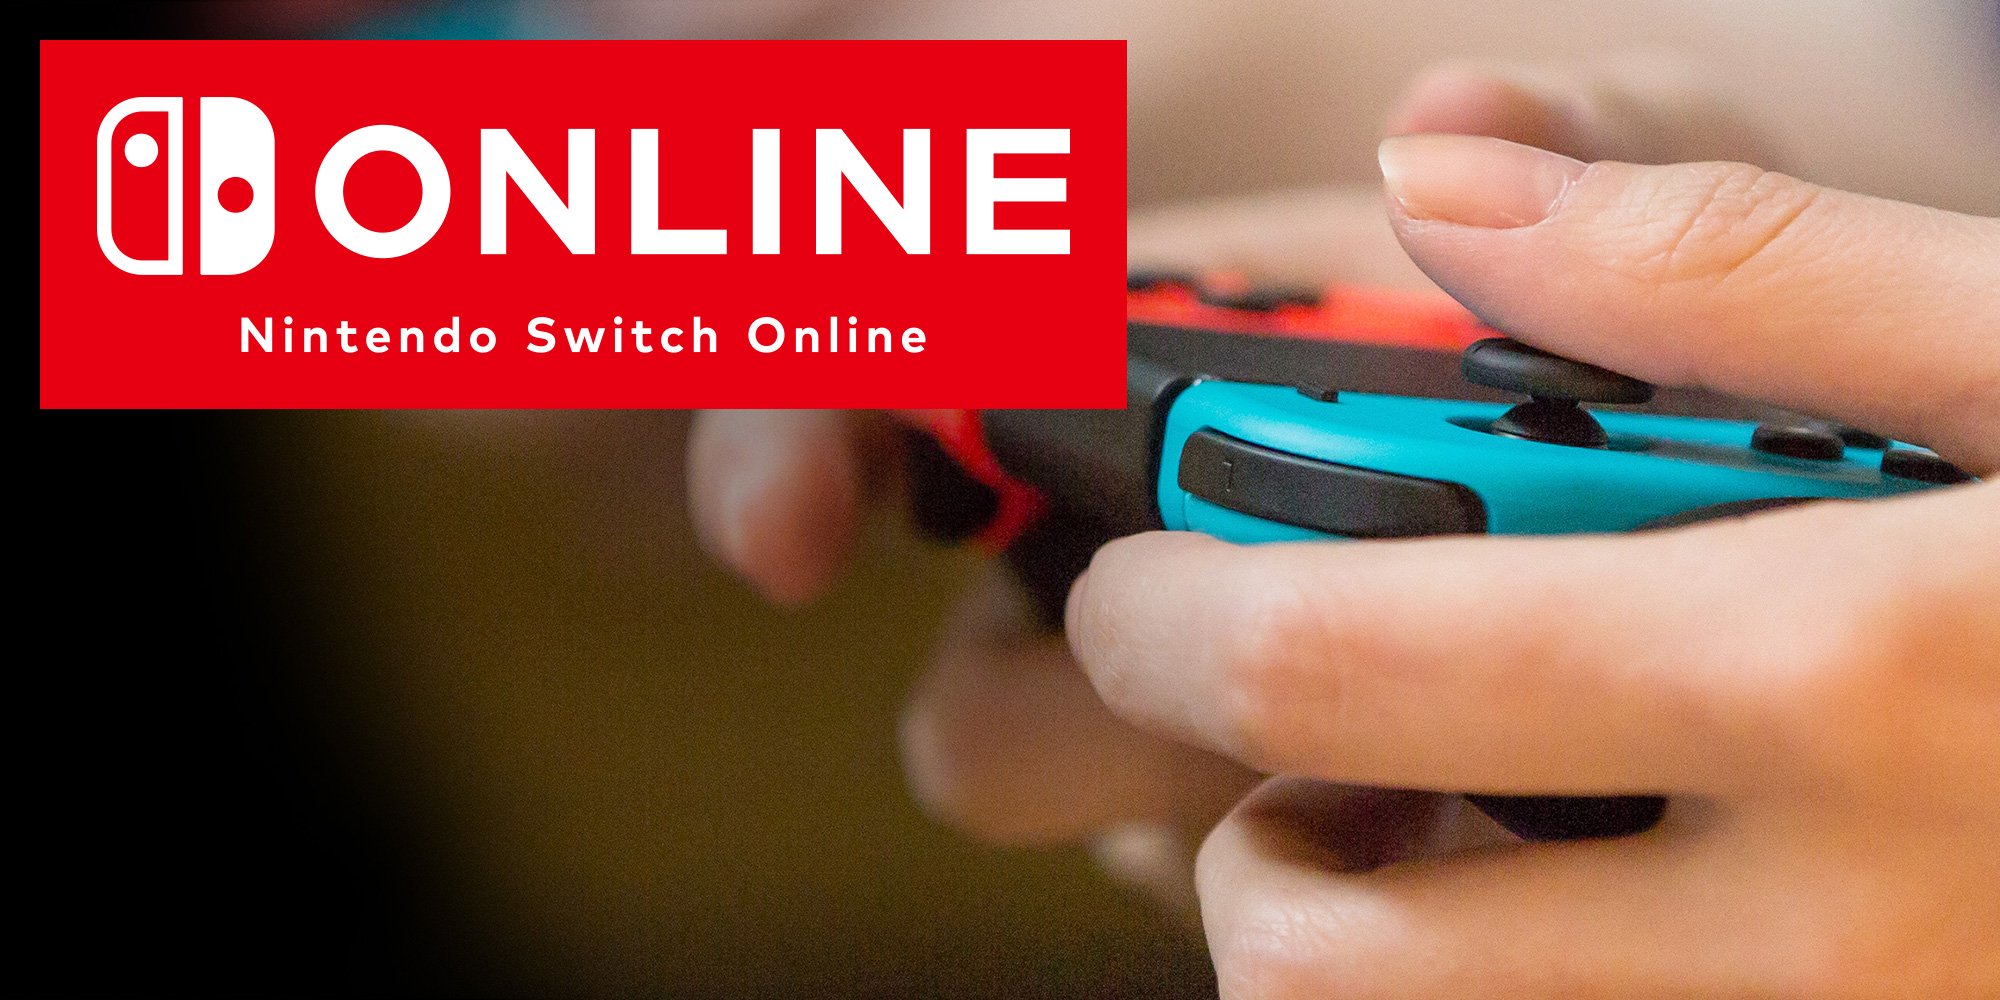 Nintendo Switch Online 365 Dní Family Membership + Expansion Pack 5